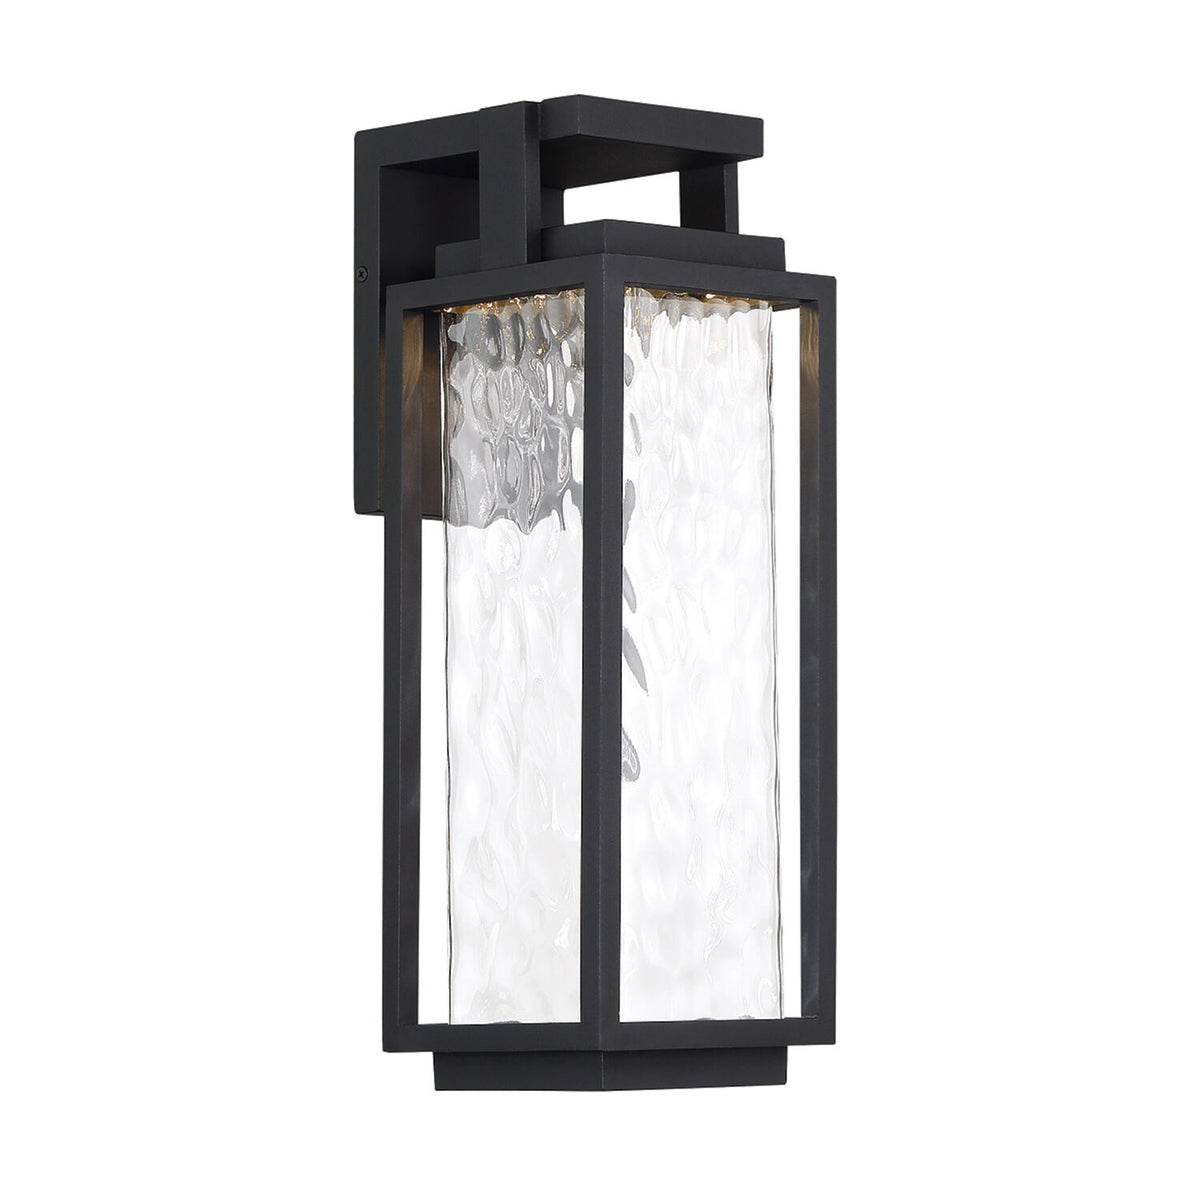 TWO IF BY SEA LED OUTDOOR WALL LIGHT